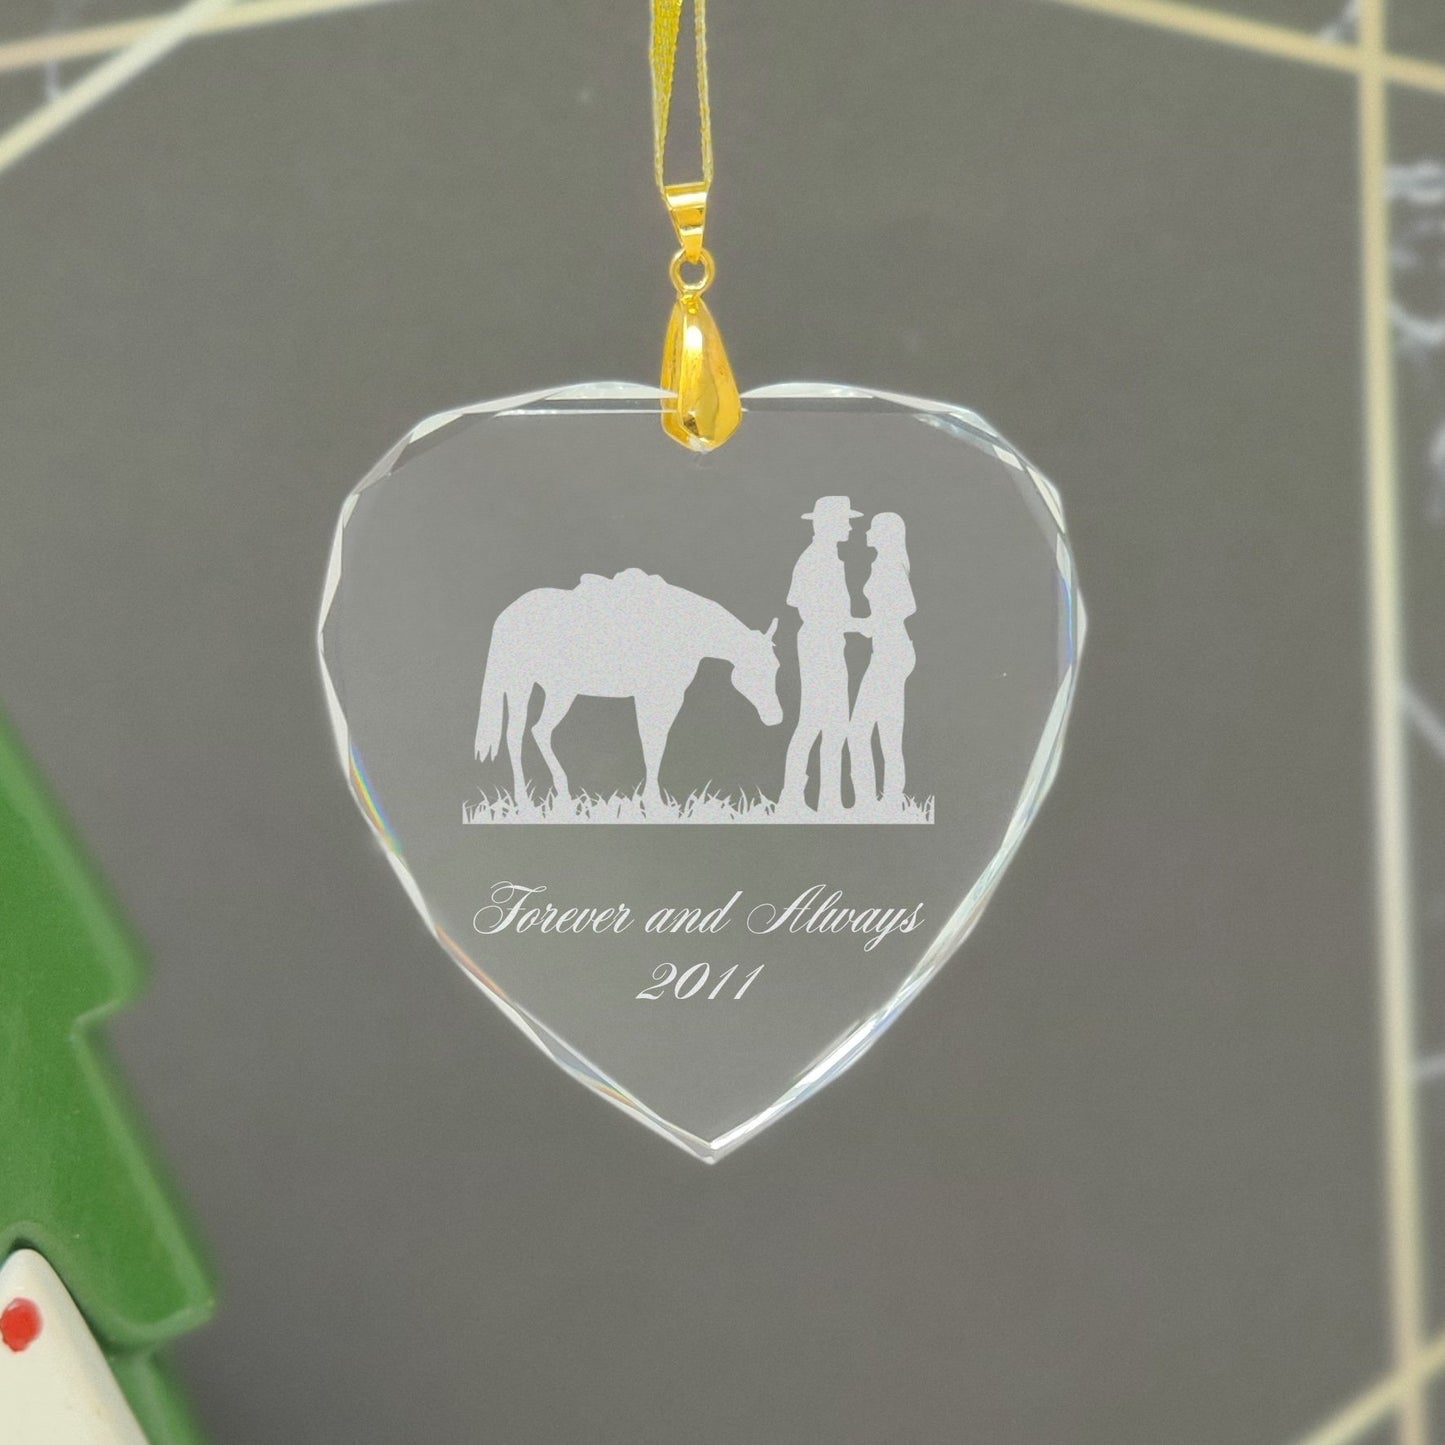 LaserGram Christmas Ornament, World's Greatest Daughter, Personalized Engraving Included (Heart Shape)